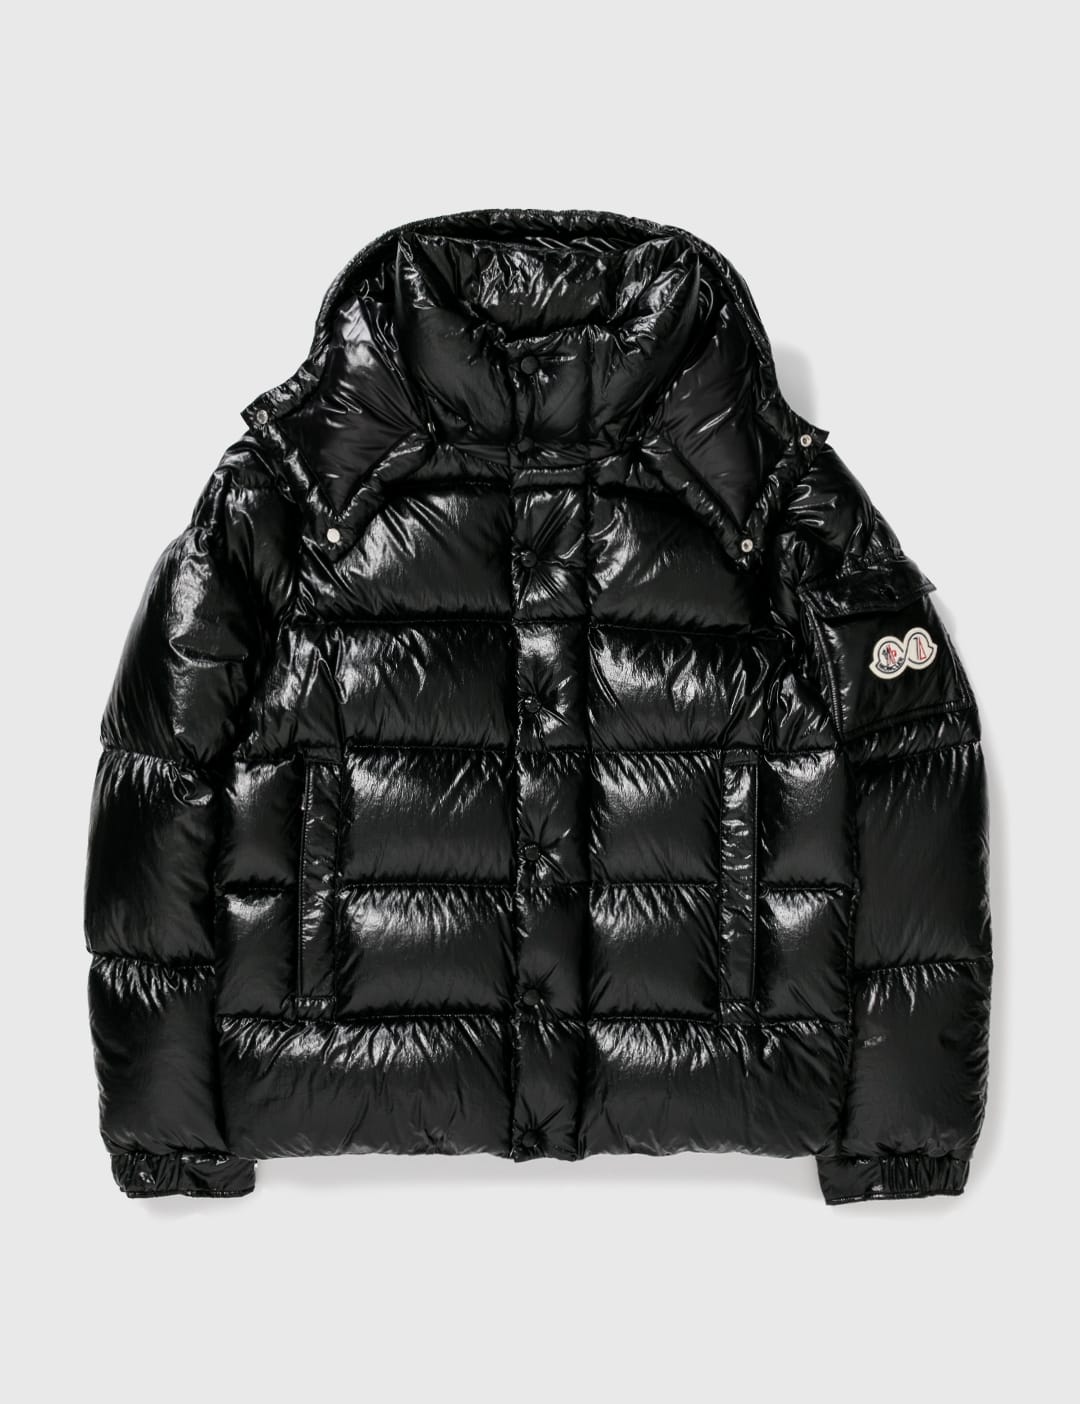 Seven Decades of Moncler | HBX - Globally Curated Fashion and 